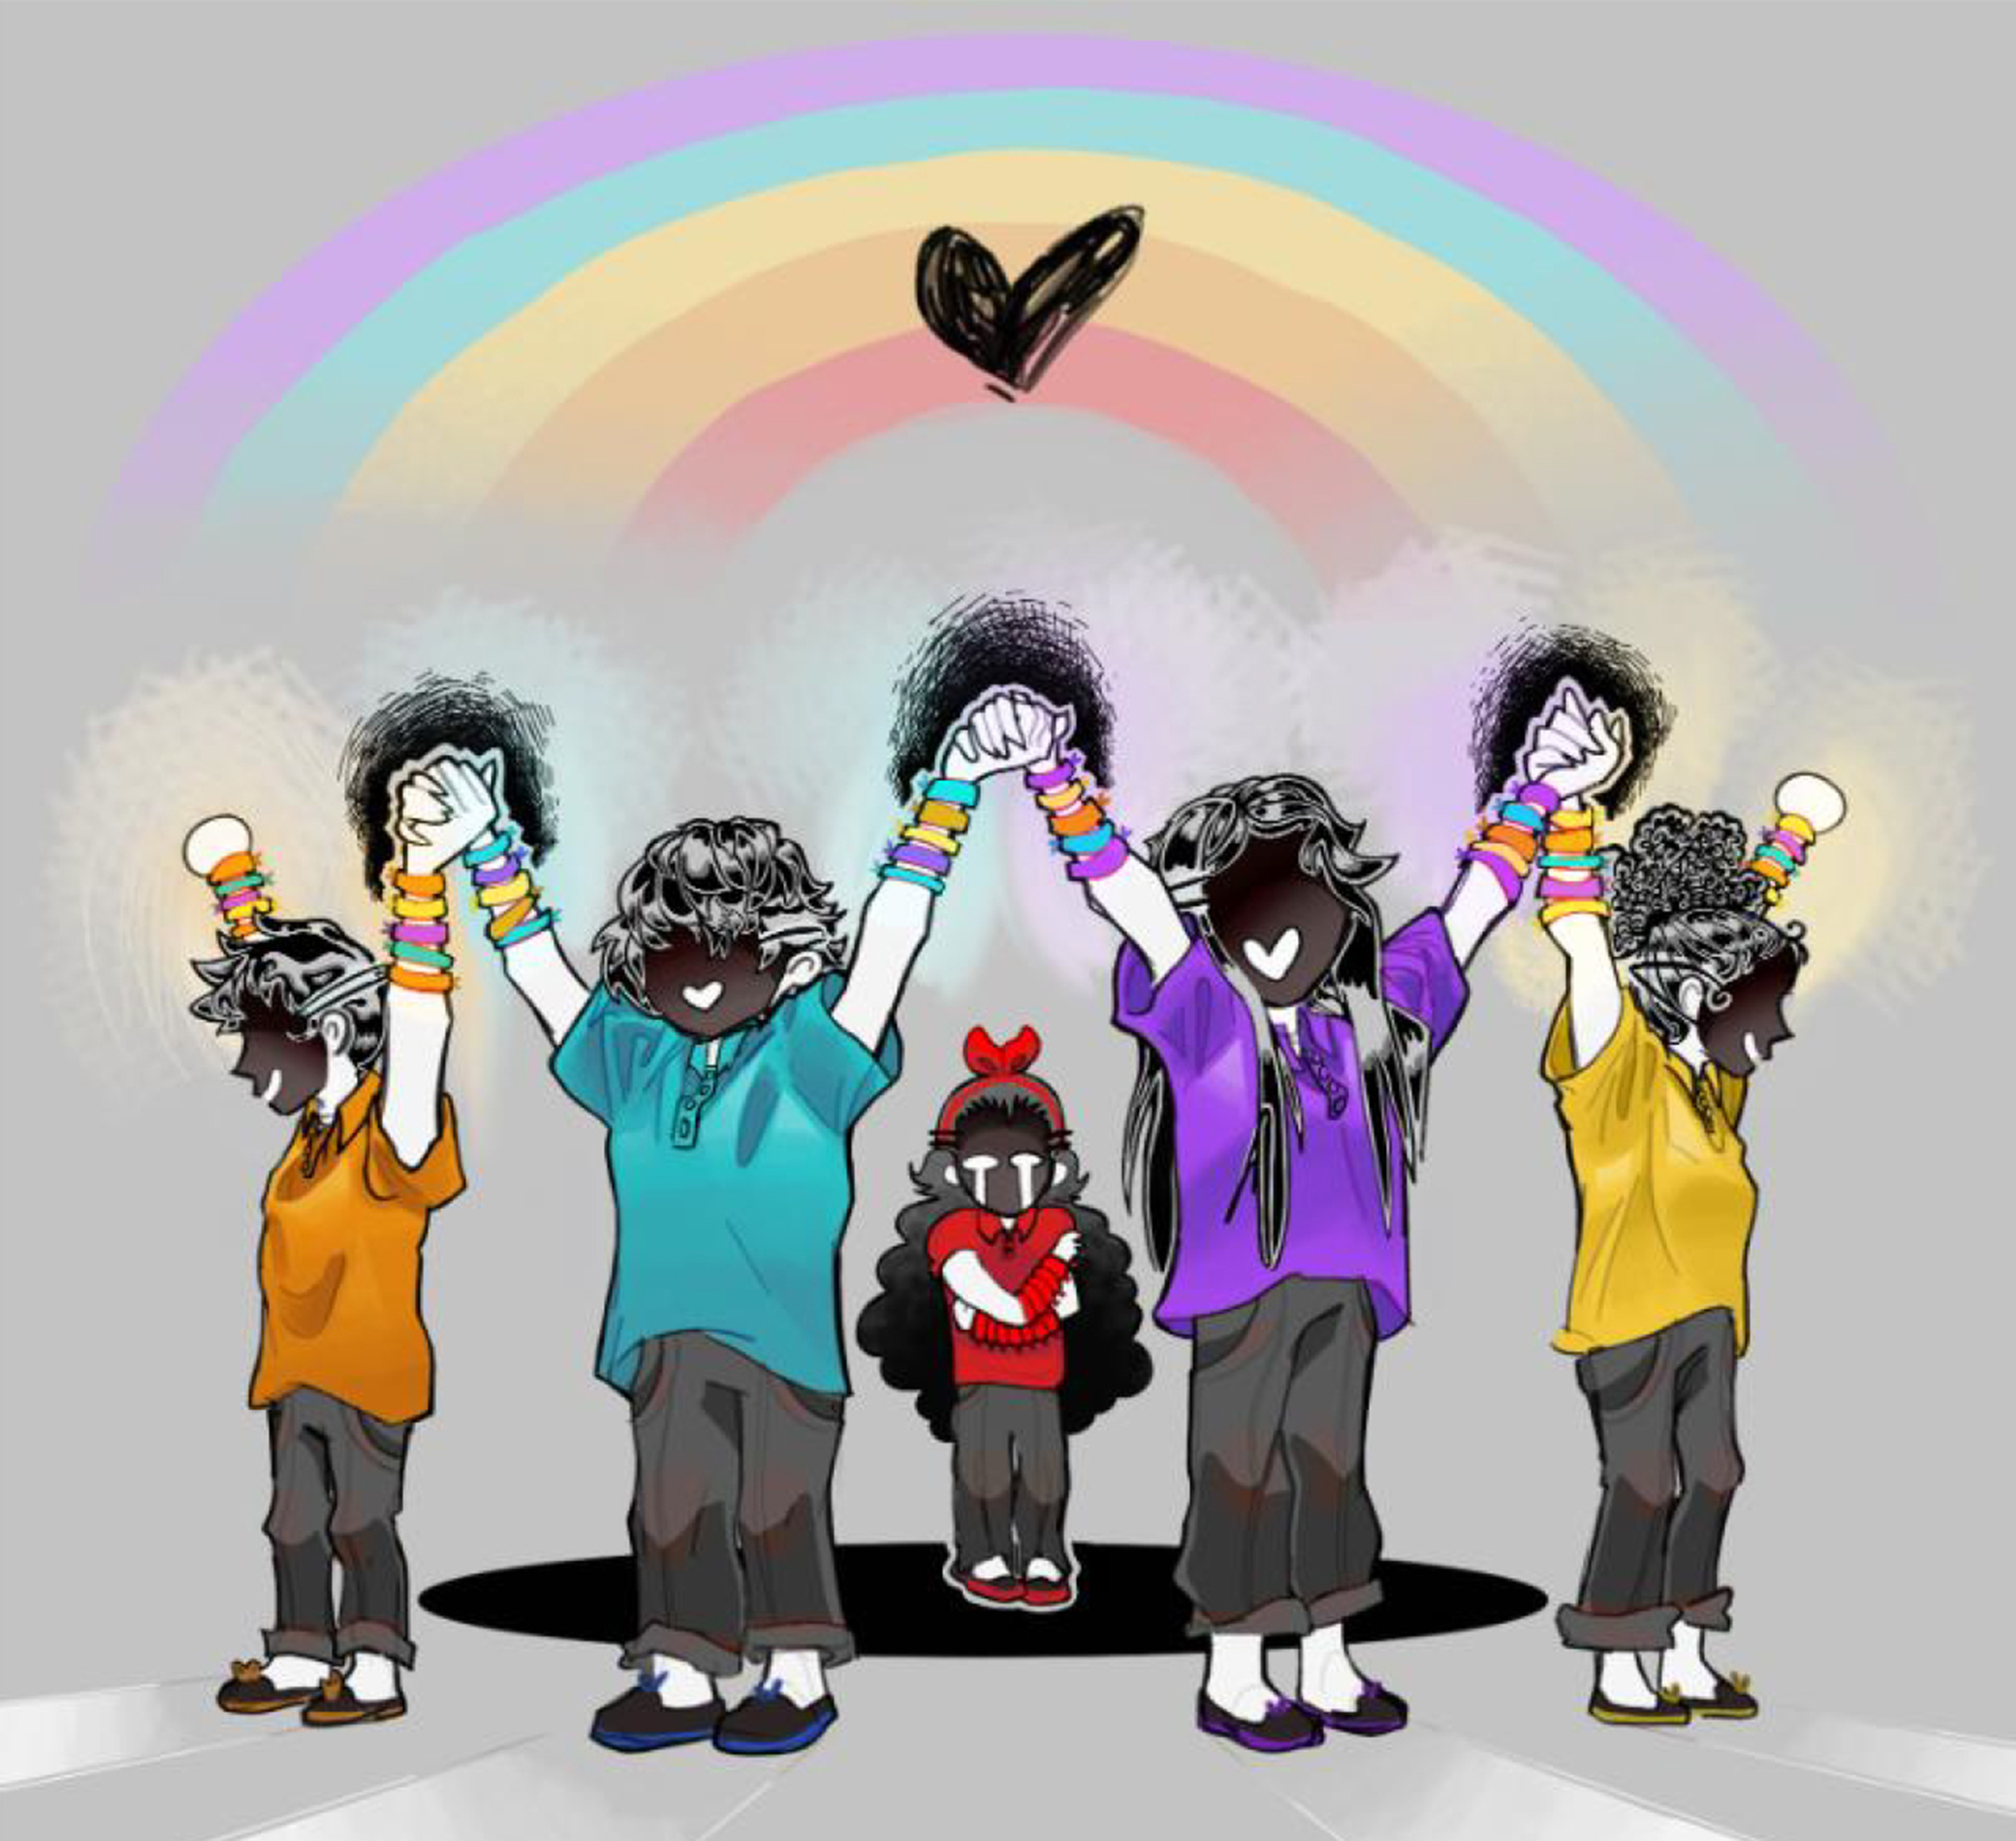 Illustration of four people wearing smiling masks, holding hands with lifted arms with a rainbow in the background and a young woman with a crying mask behind them